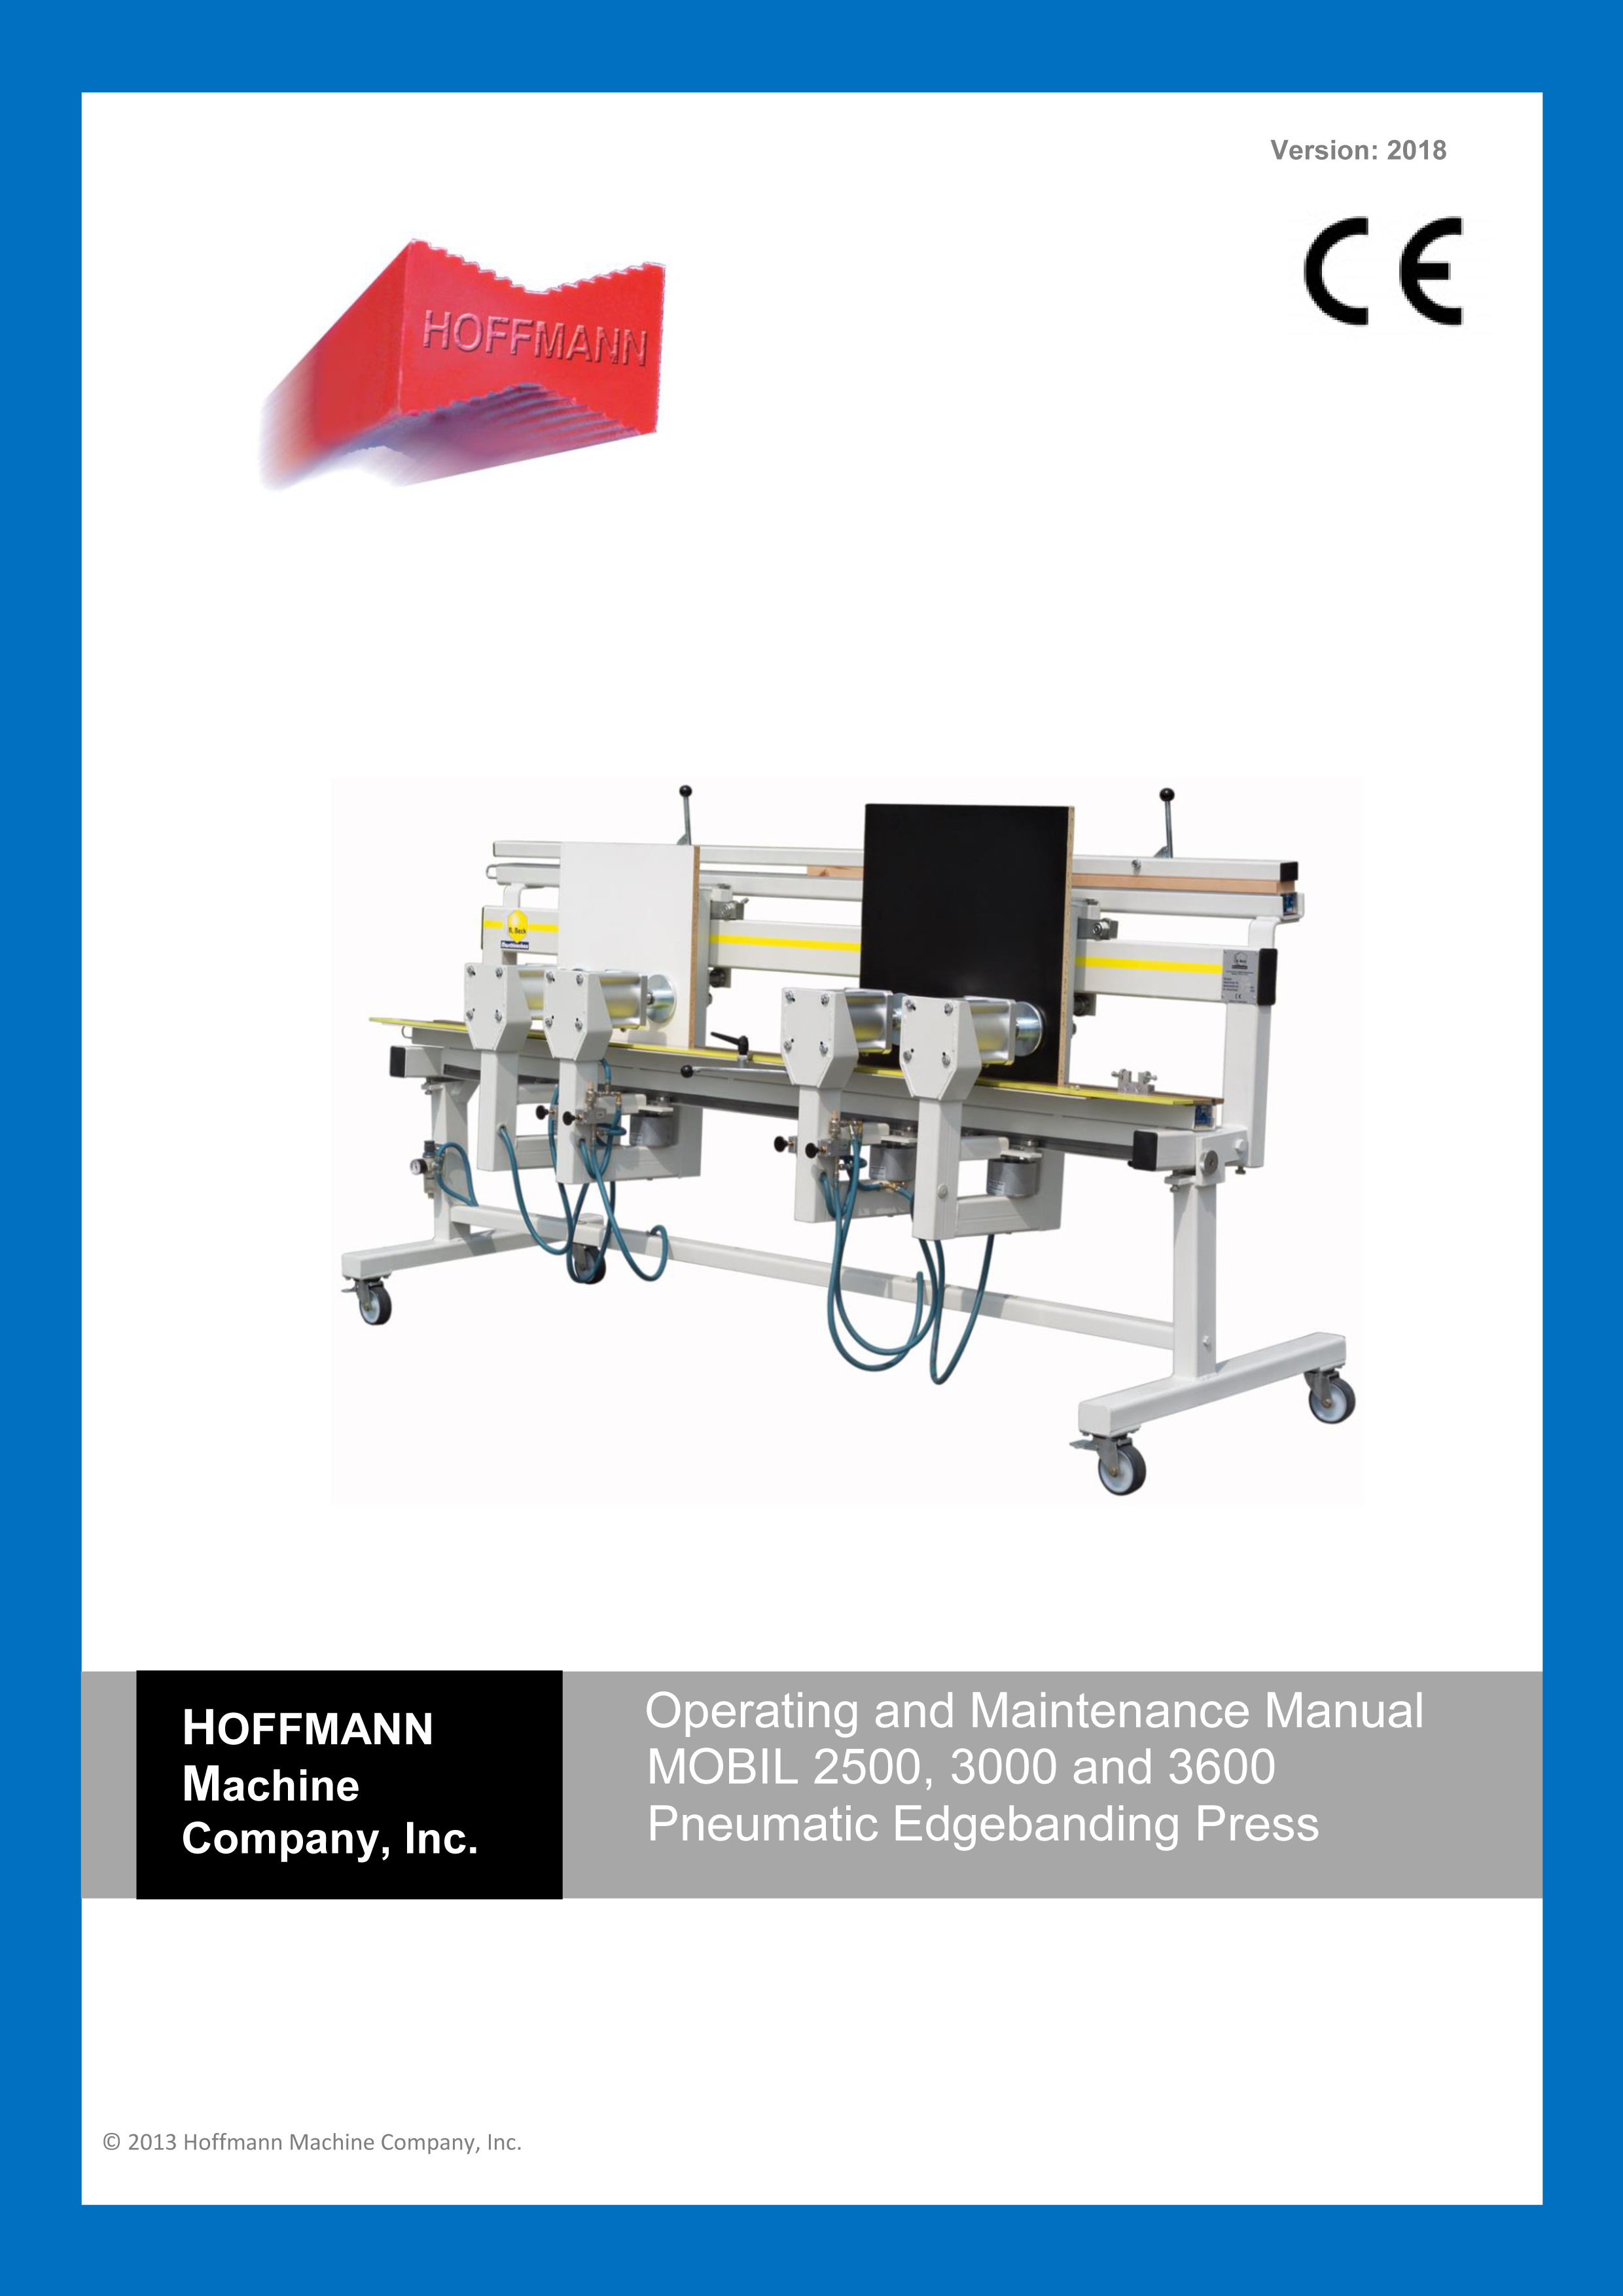 hoffmann-mobil-press-operating-manual-cover-page.jpg